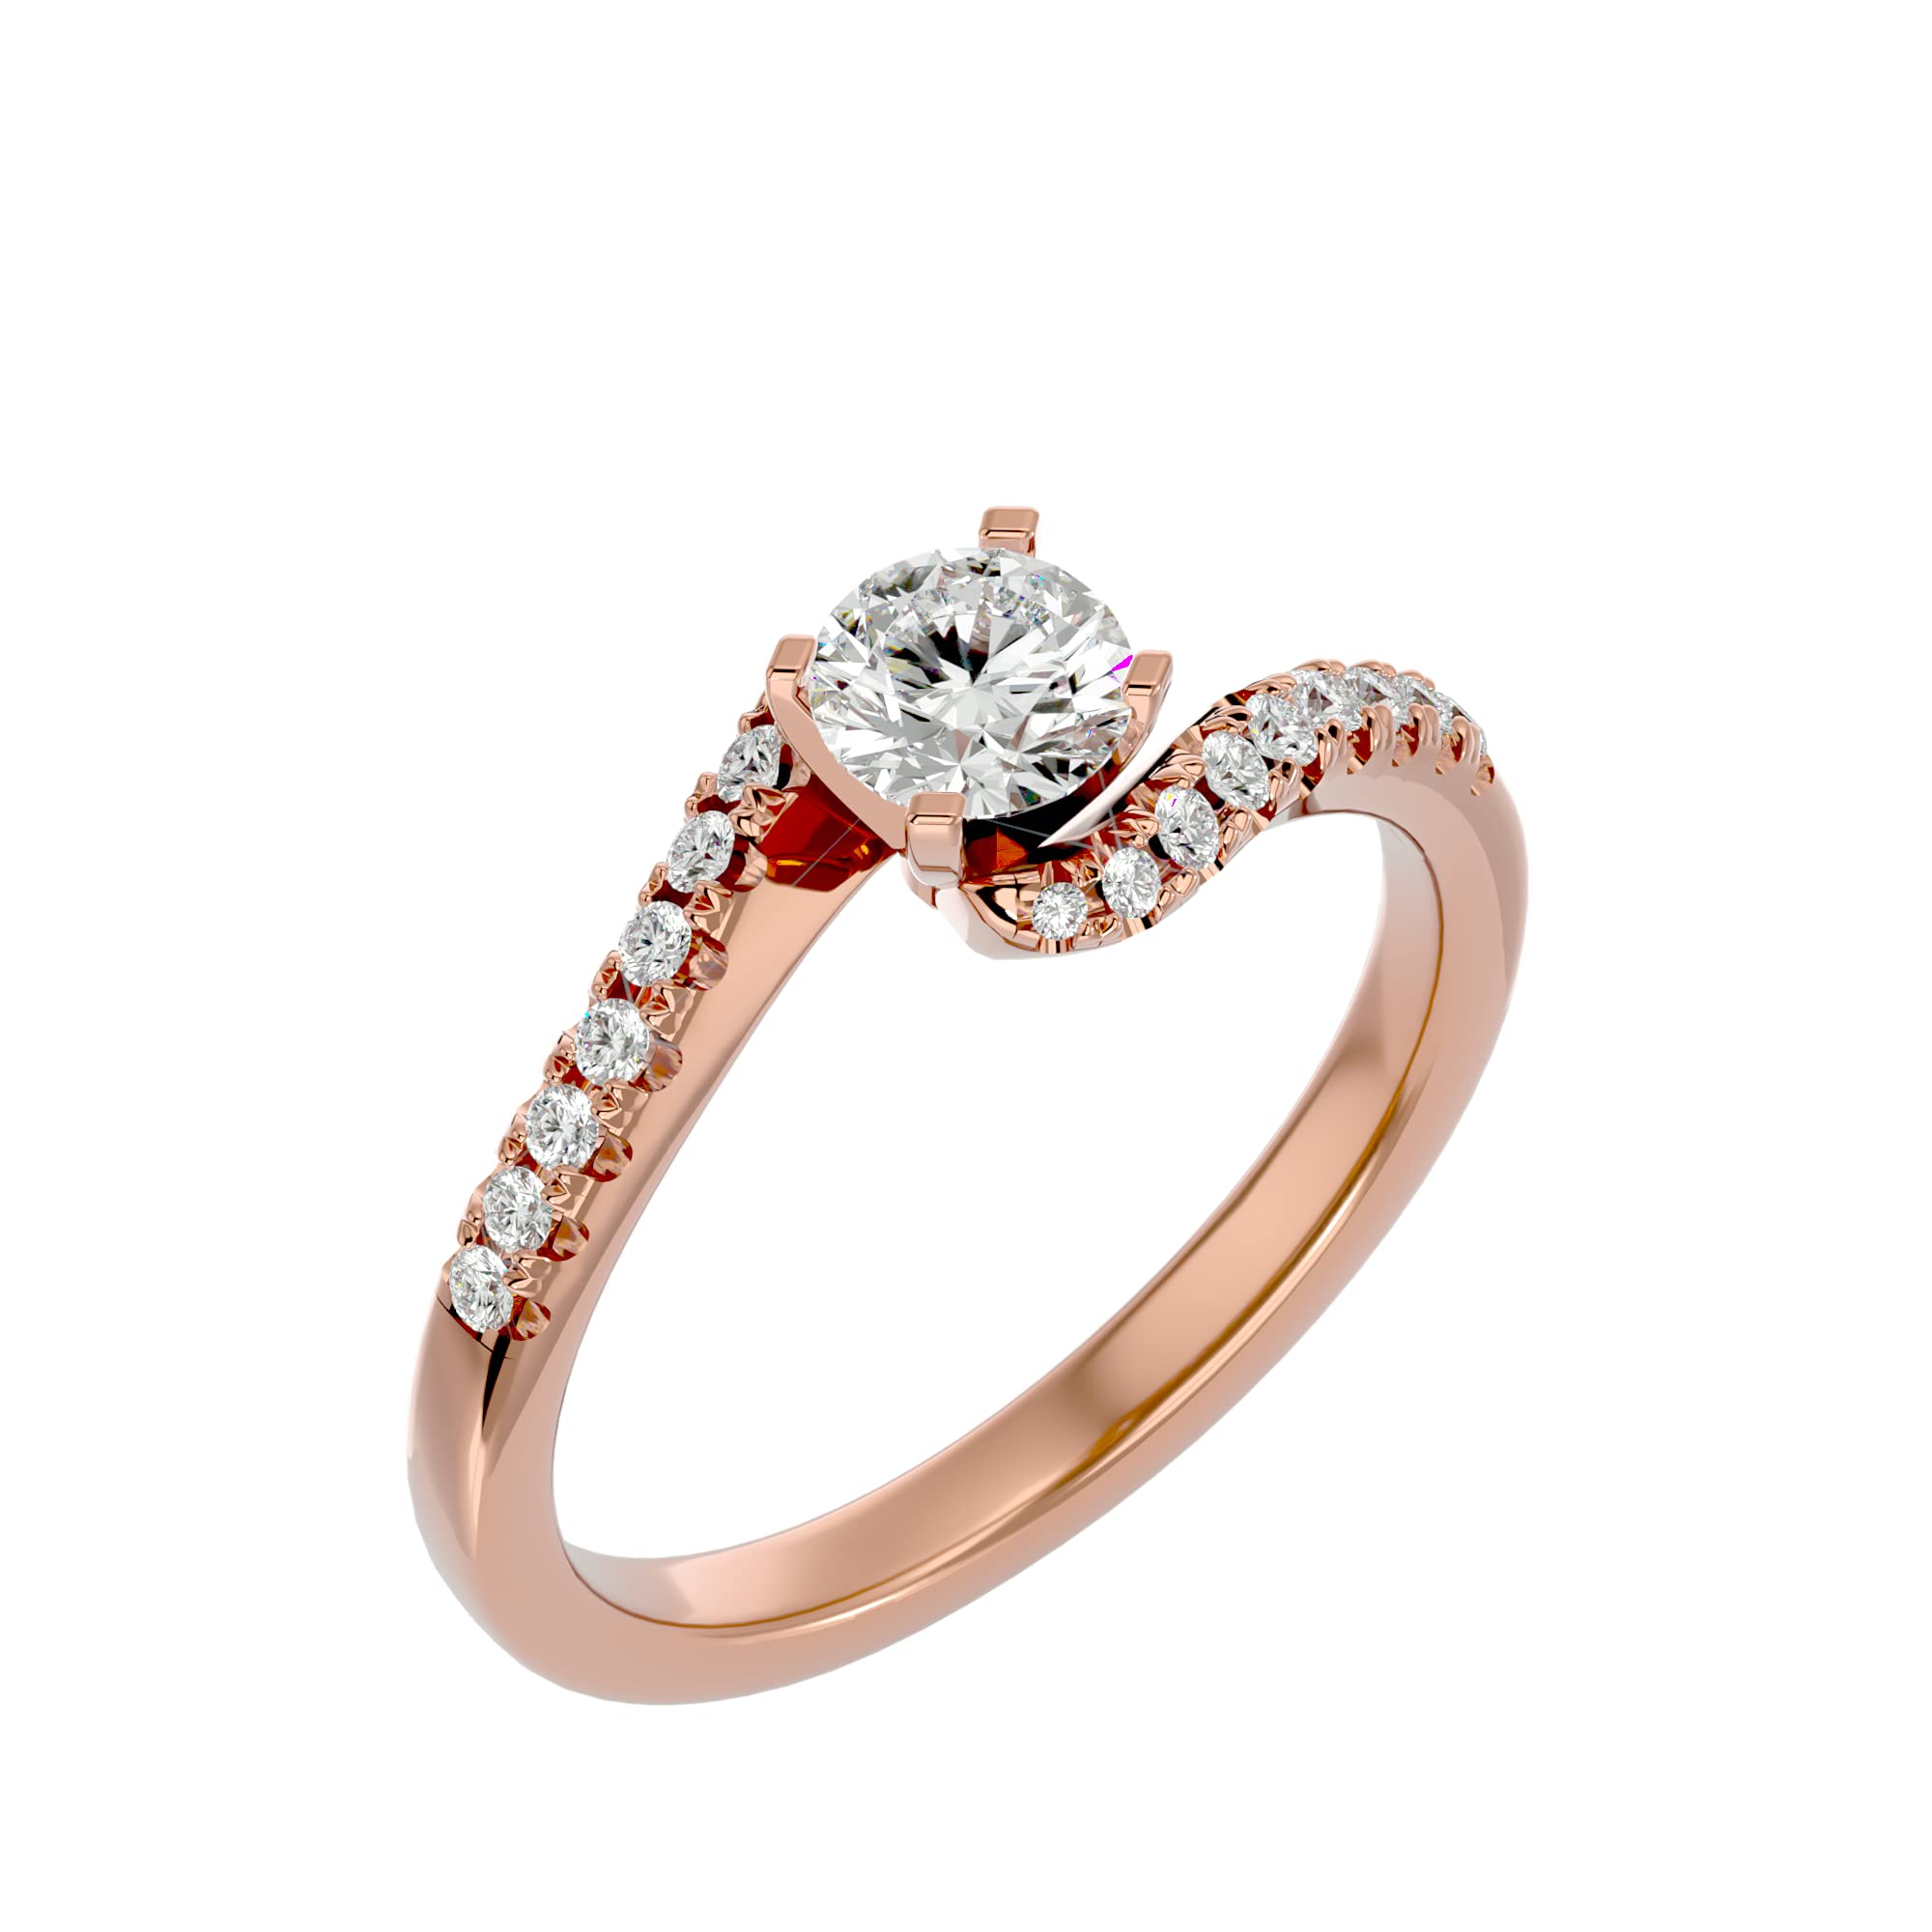 Certified 18K Gold Ring in Round Cut Moissanite Diamond (0.51 ct) Round Cut Natural Diamond (0.16 ct) With White/Yellow/Rose Gold Engagement Ring For Women